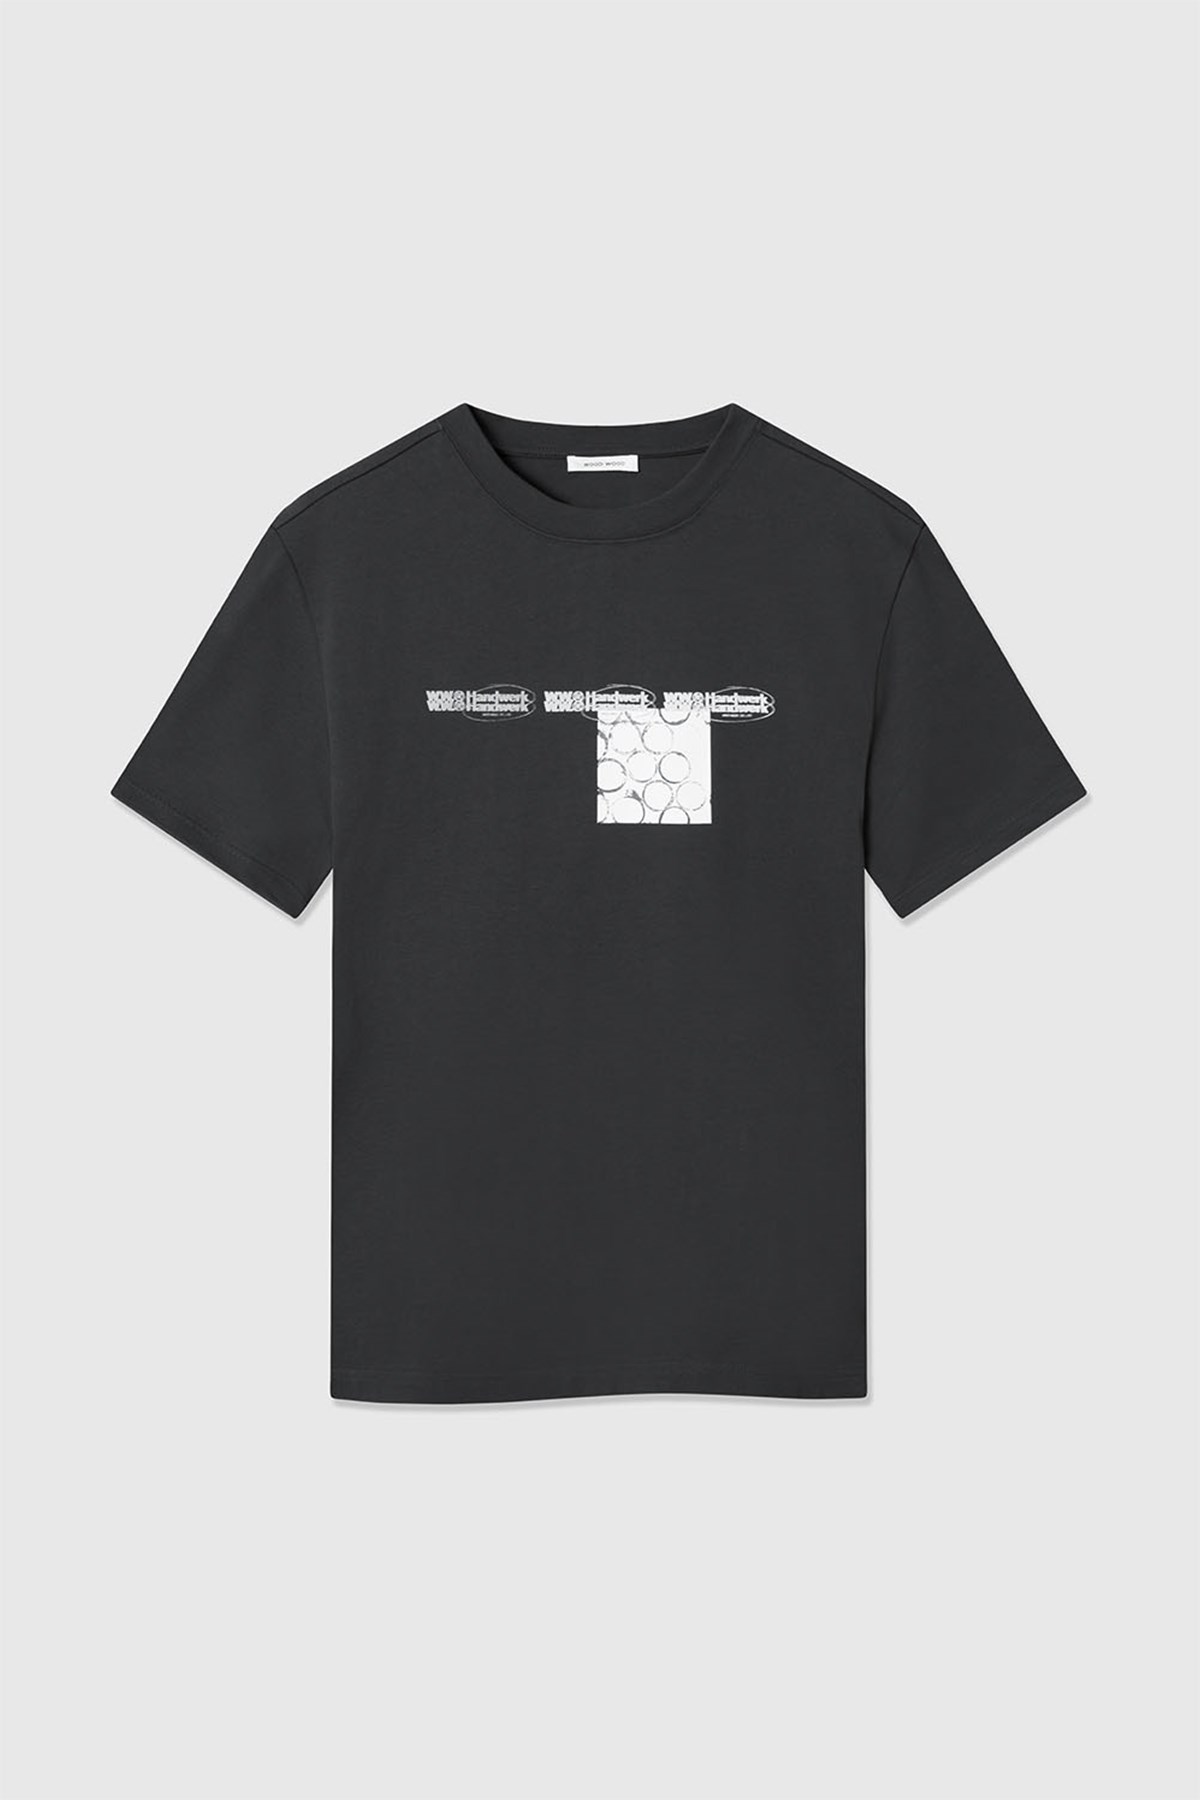 Wood Wood Haider texture T-shirt Anthracite | WoodWood.com